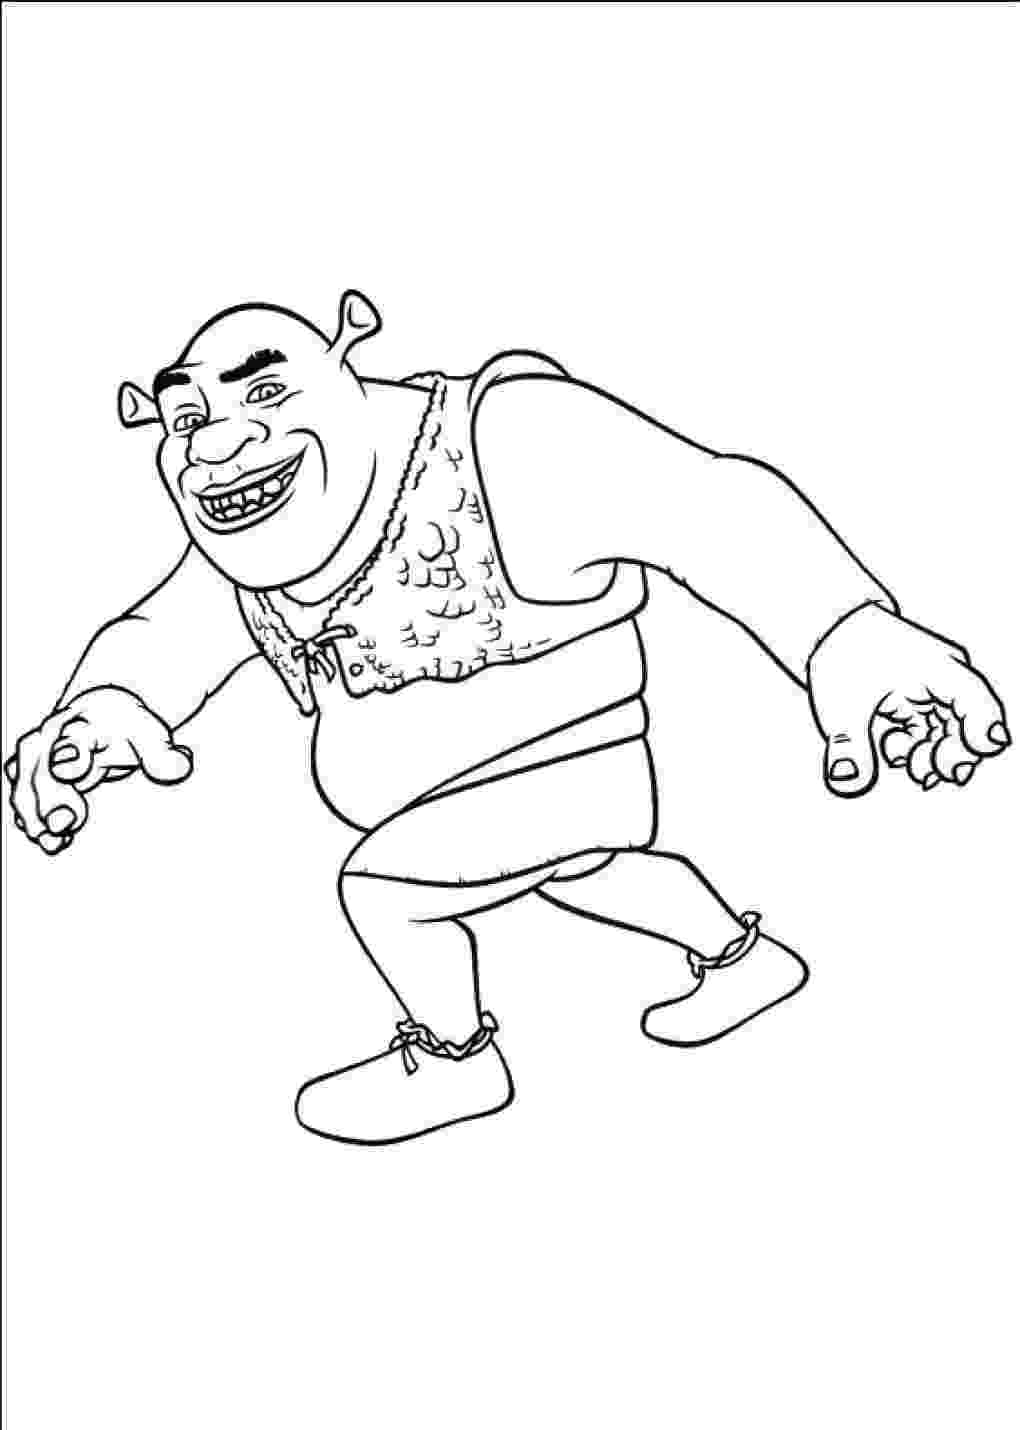 shrek pictures to colour free printable shrek coloring pages for kids colour pictures to shrek 